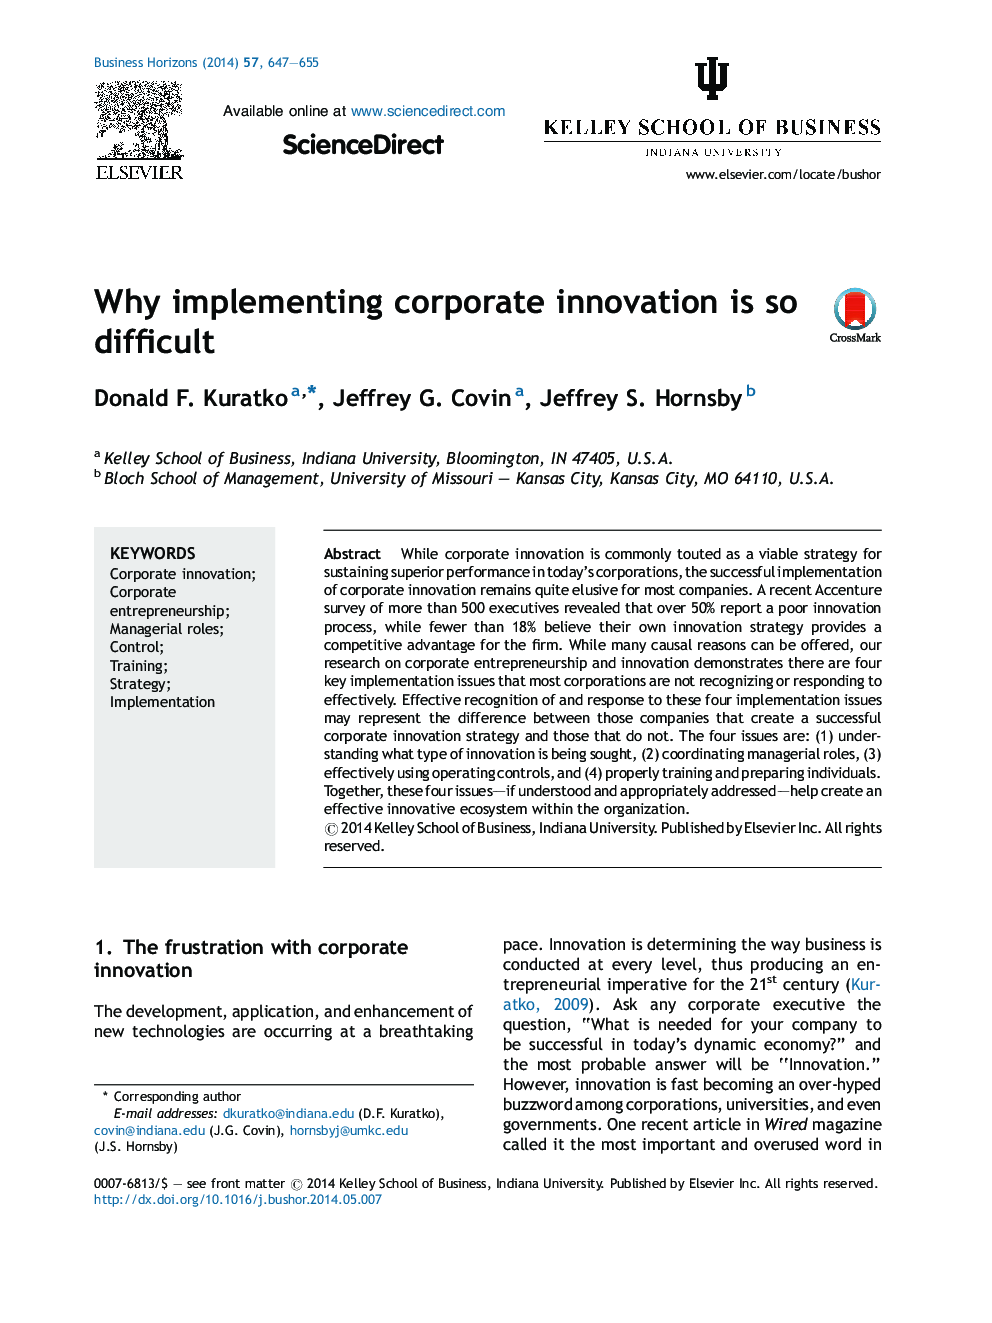 Why implementing corporate innovation is so difficult